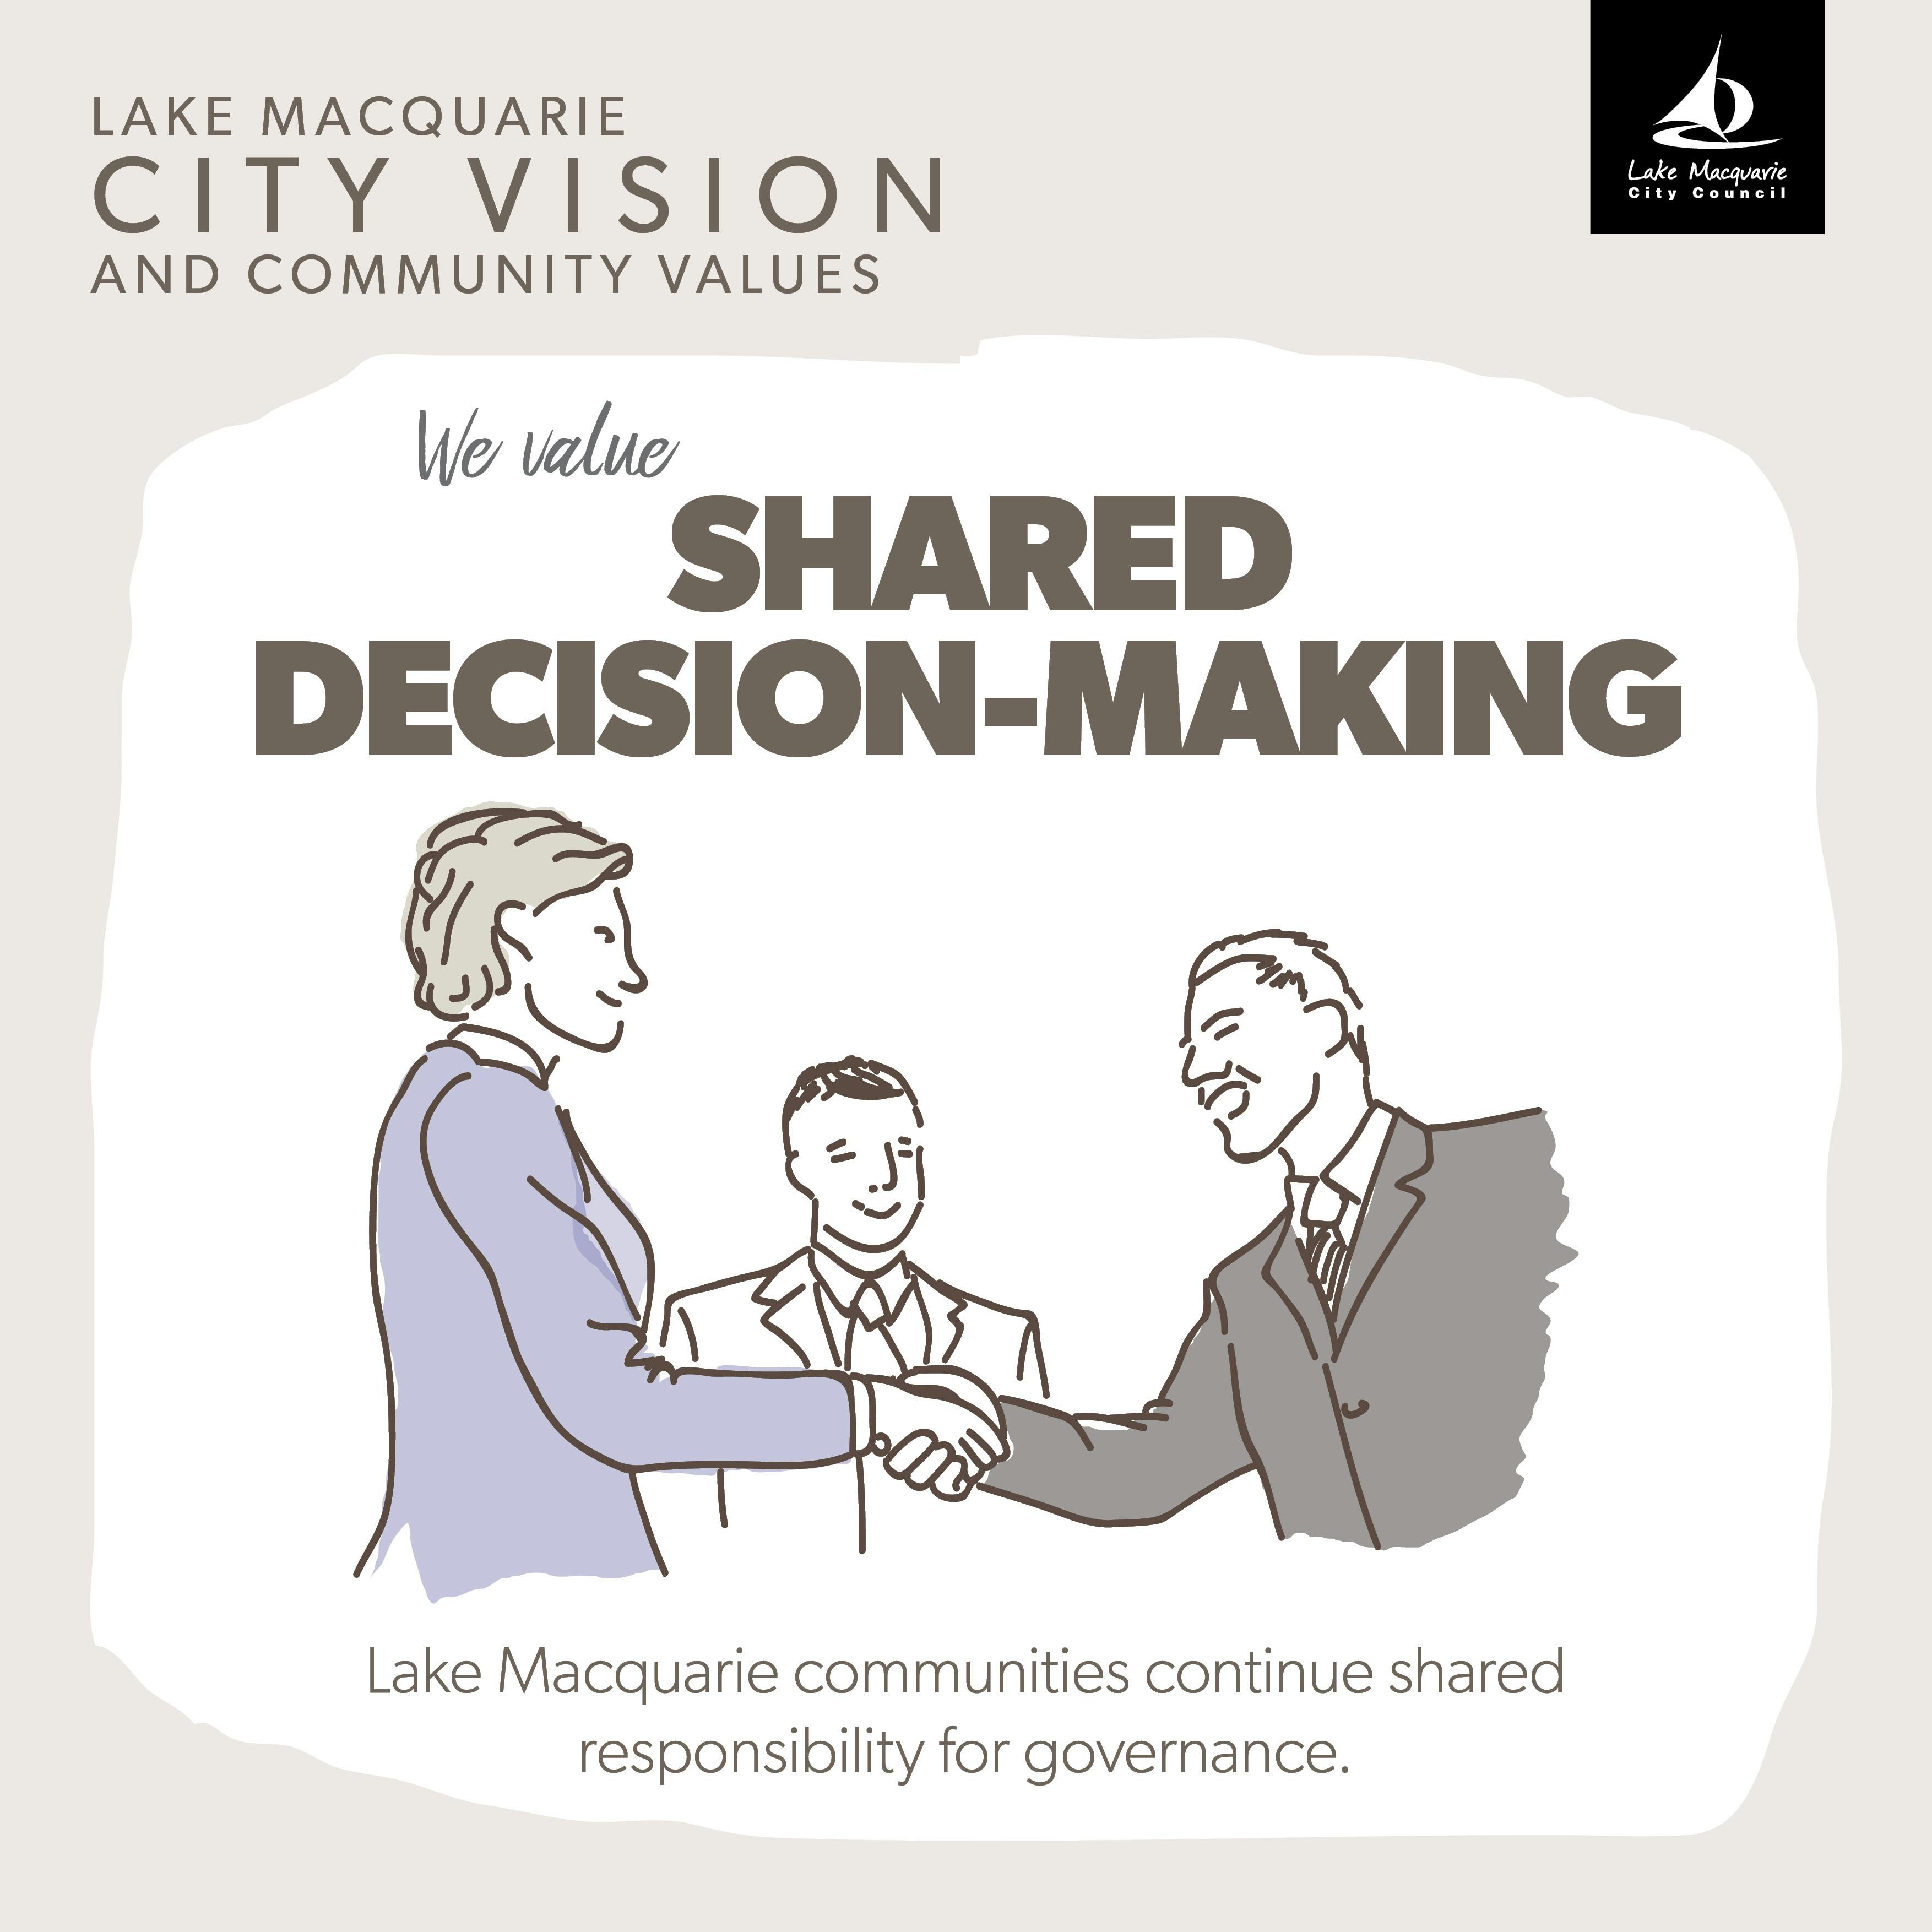 shared decision-making